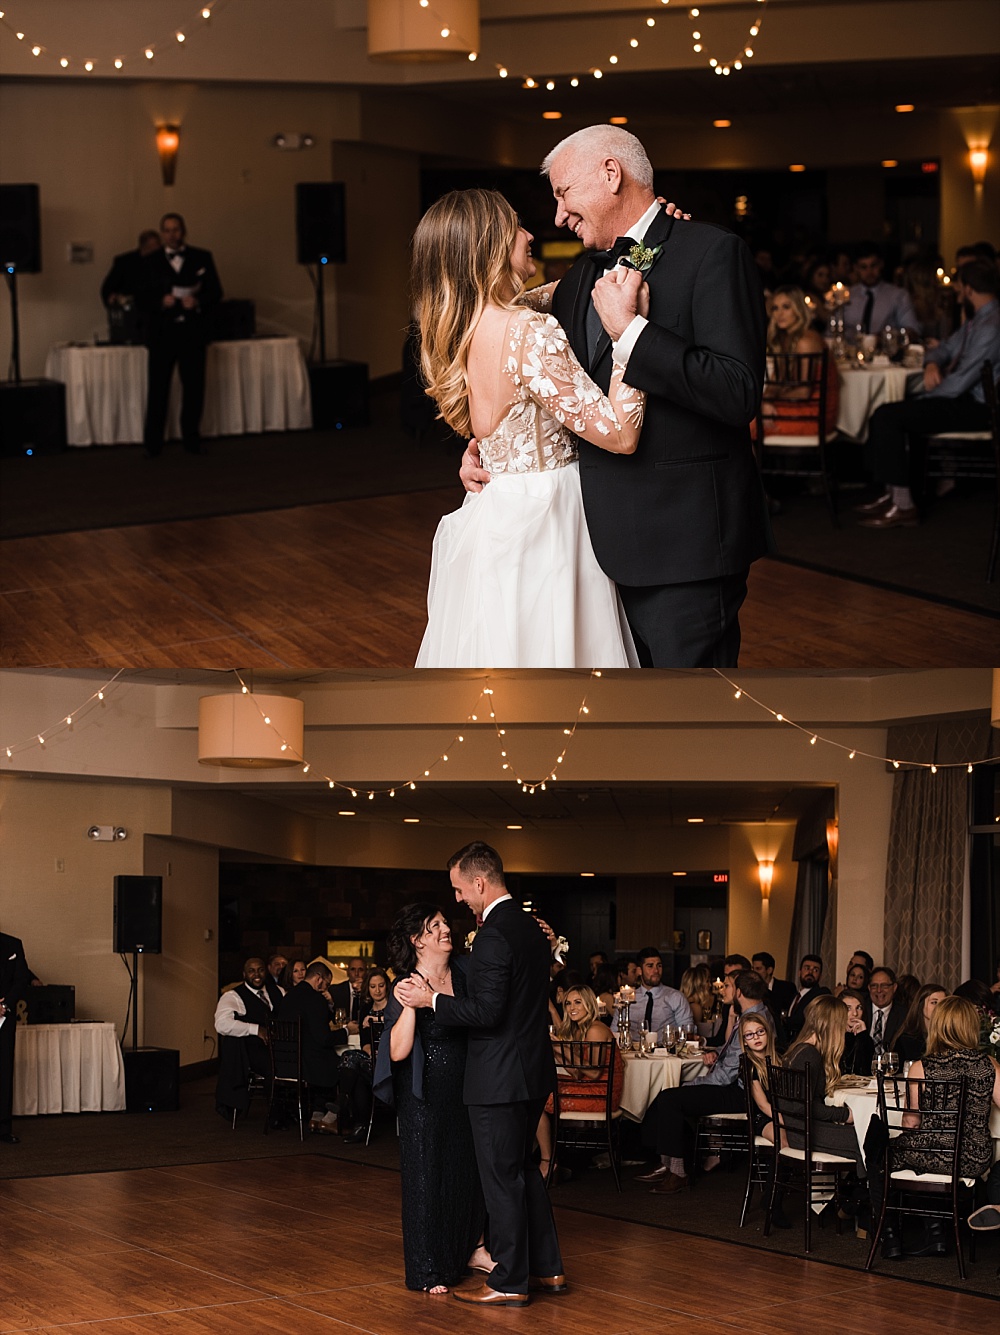 The parents of the bride and groom share their first dances during a wedding reception